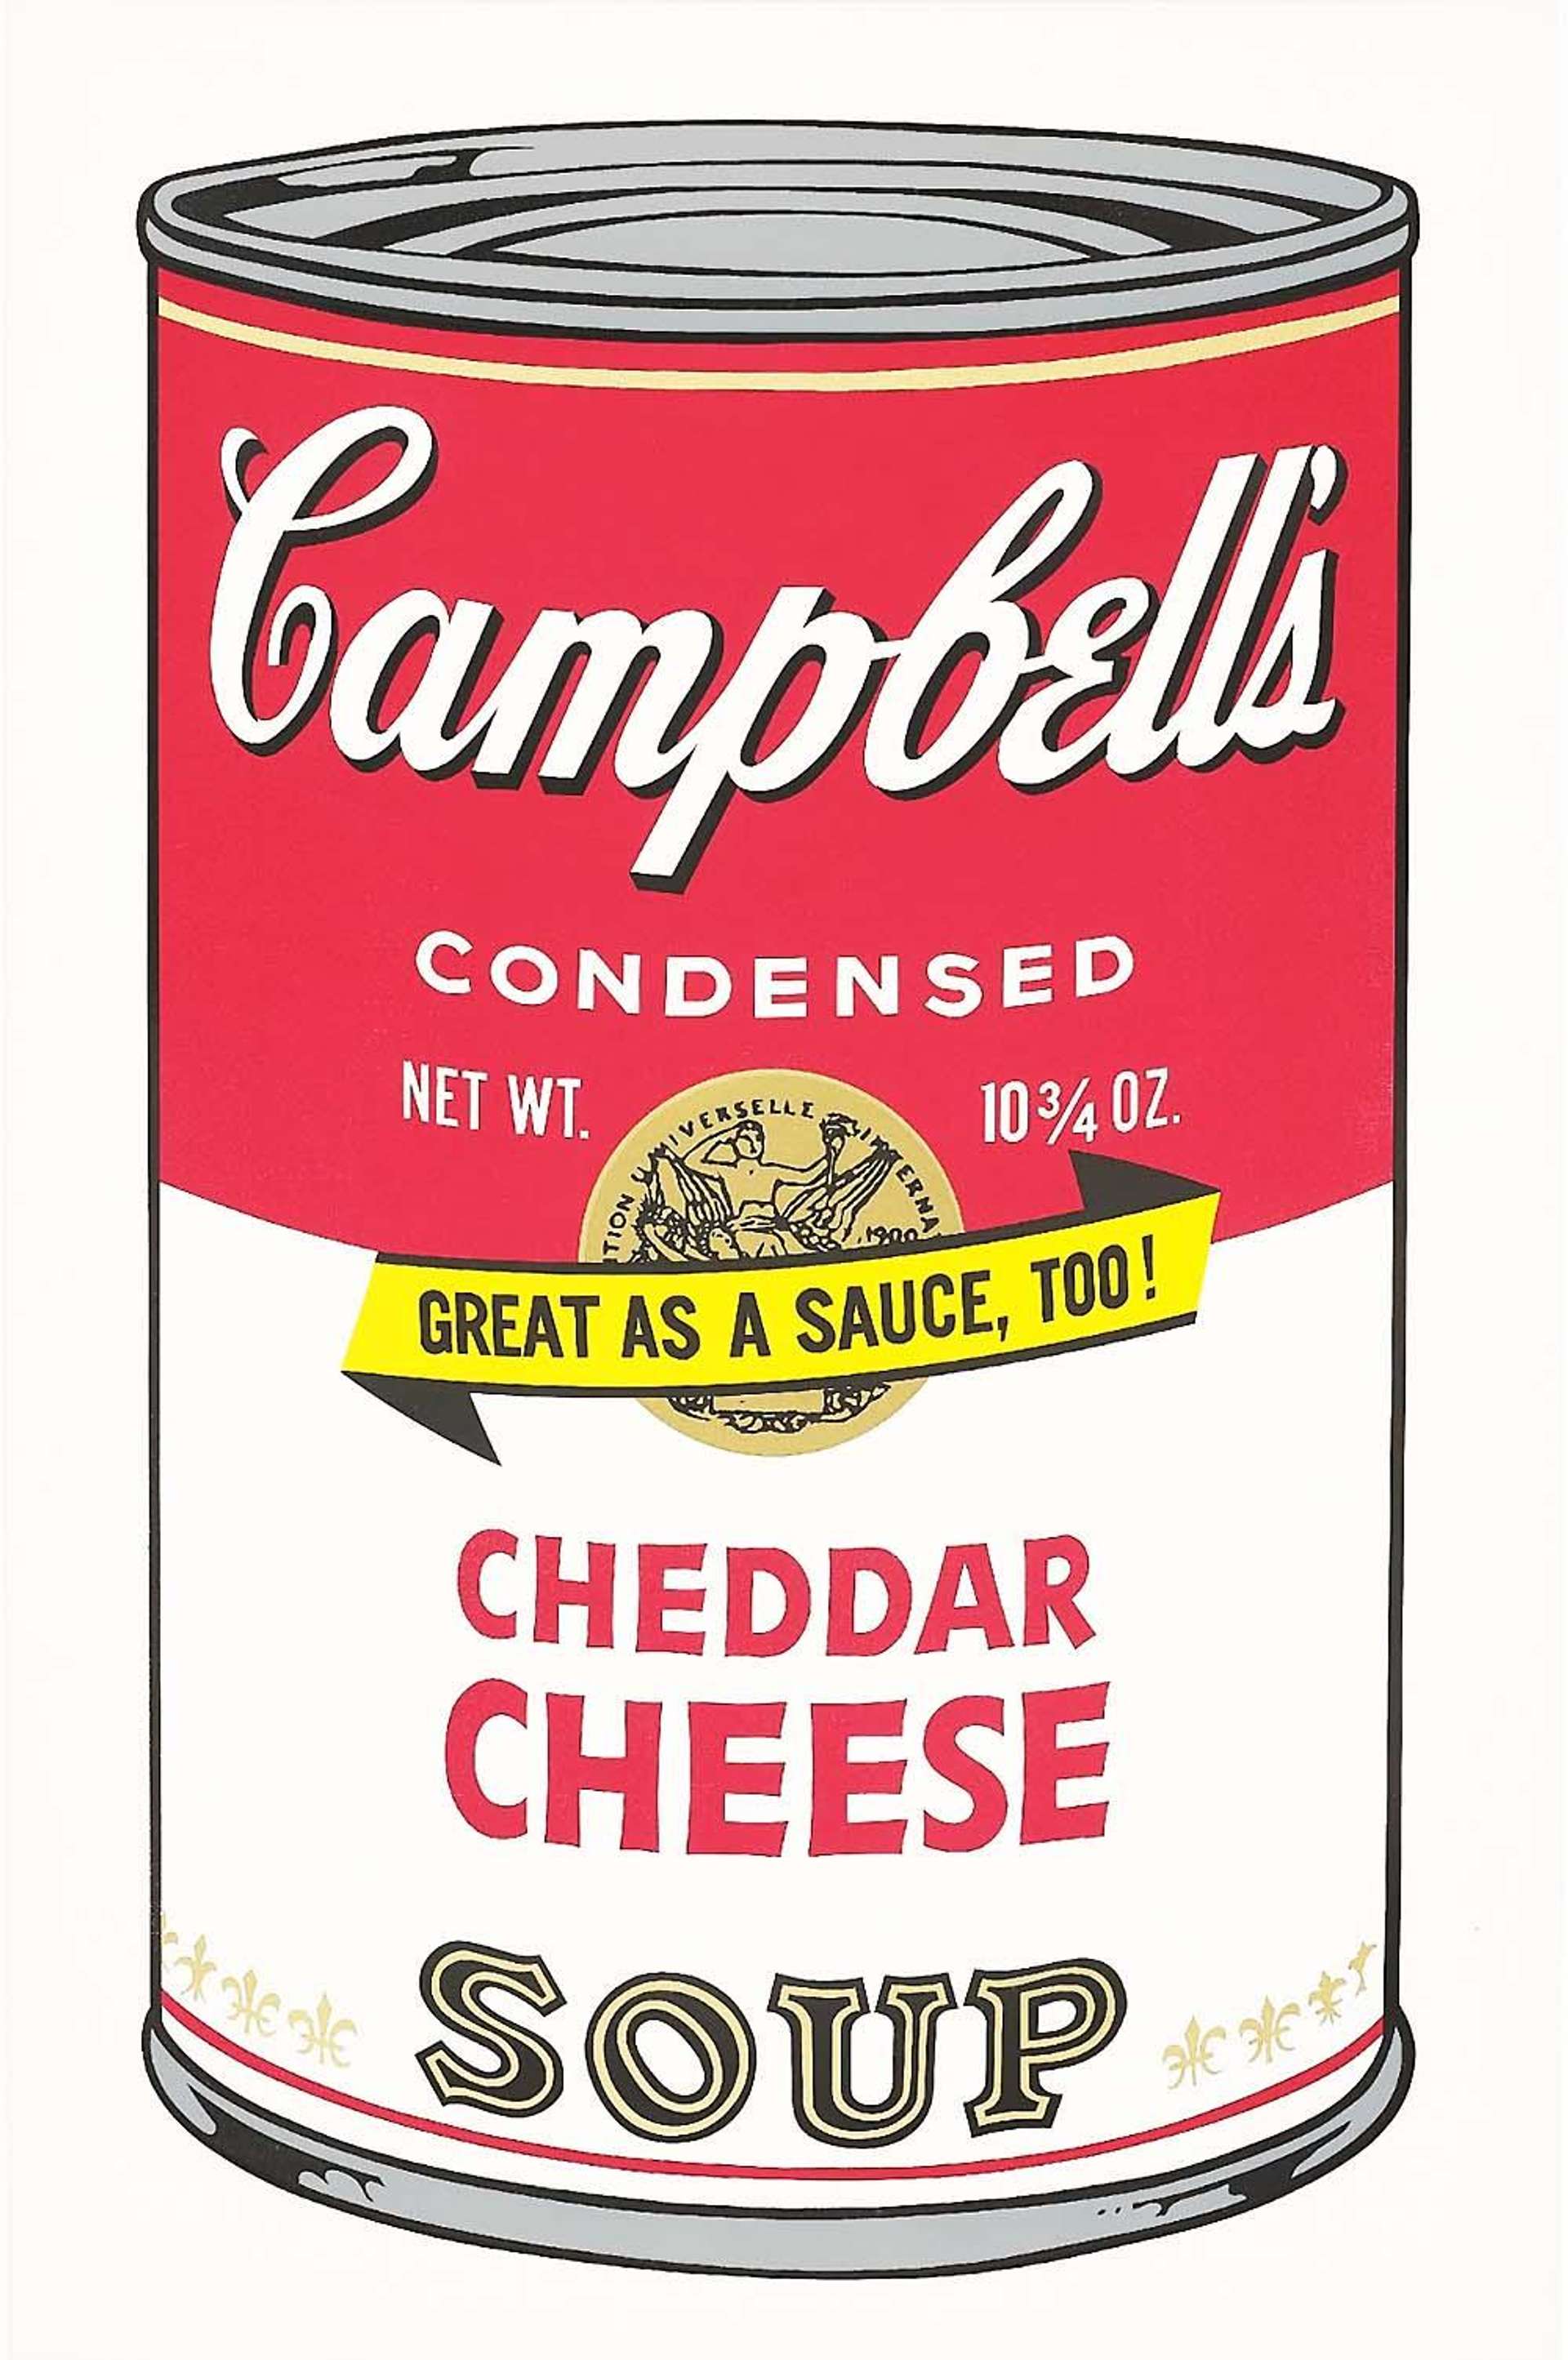 Campbell's Soup II, Cheddar Cheese (F. & S. II.63) - Signed Print by Andy Warhol 1969 - MyArtBroker